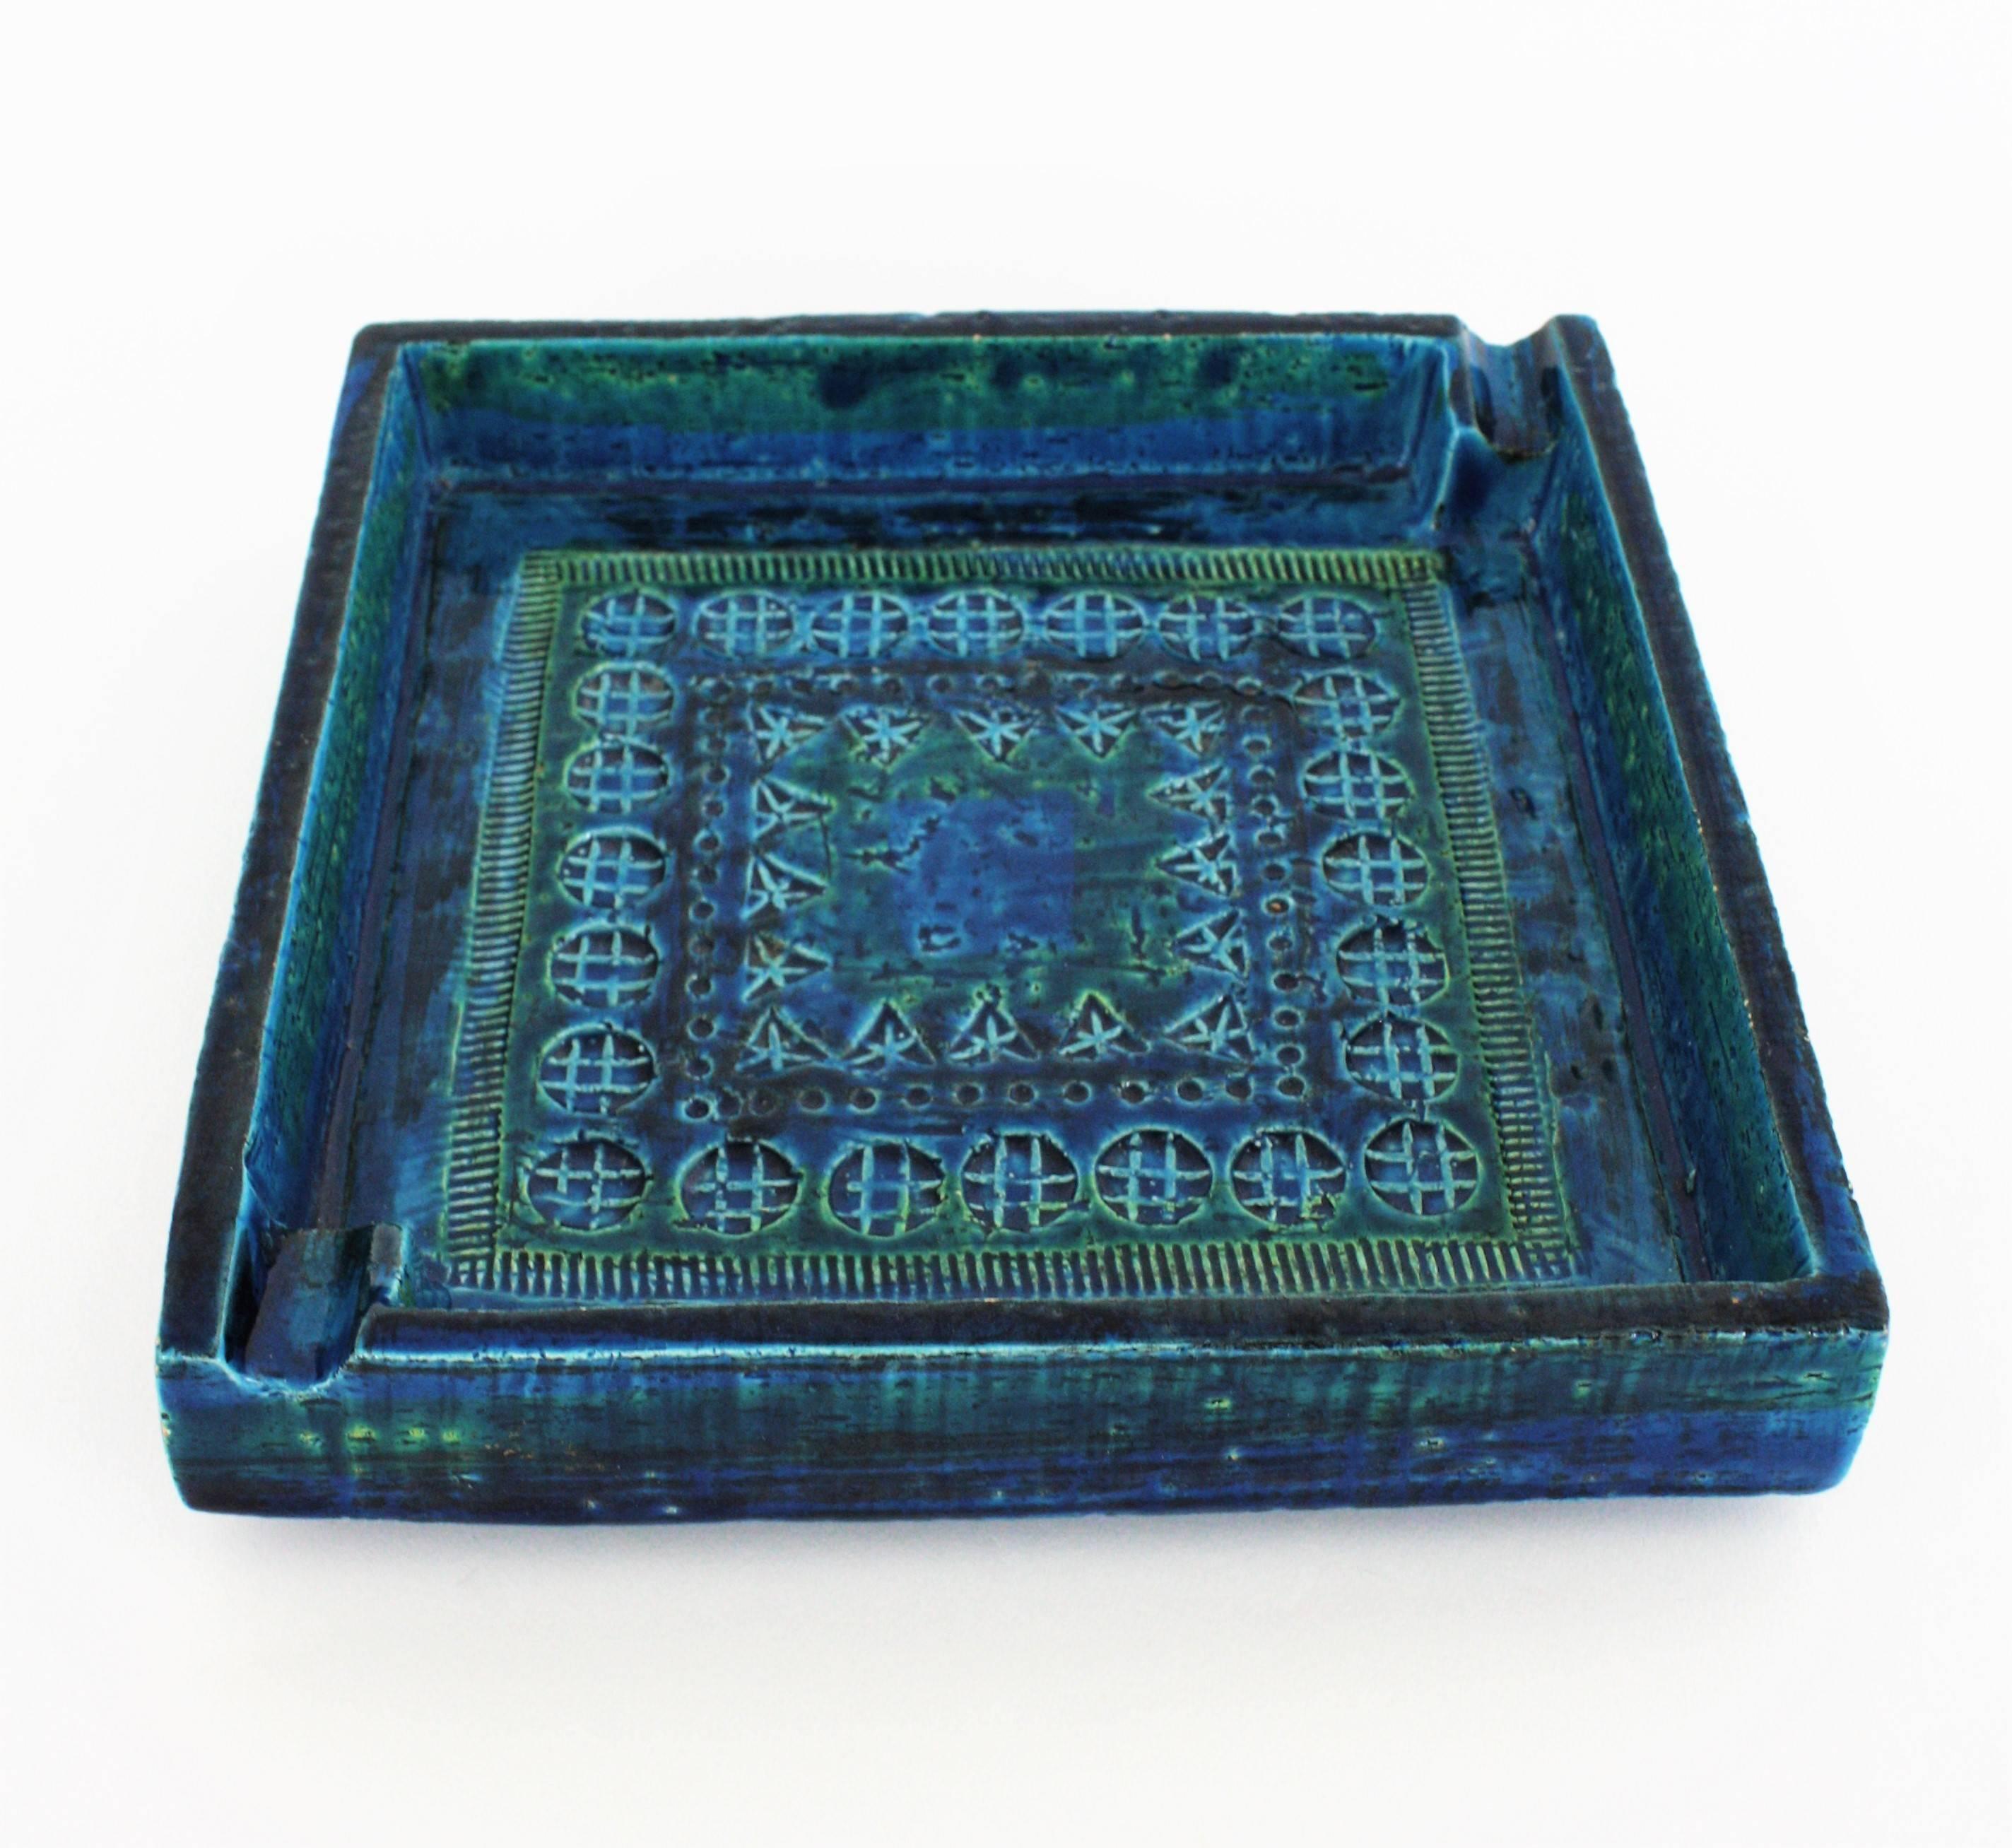 Large Rimini blue, blue glazed terracotta ceramic ashtray design by Aldo Londi and manufactured by Bitossi. Handcrafted in Italy with hand-carved geometric design and in a glazed vibrant turquoise and cobalt blue. It has two cigarette holders at the